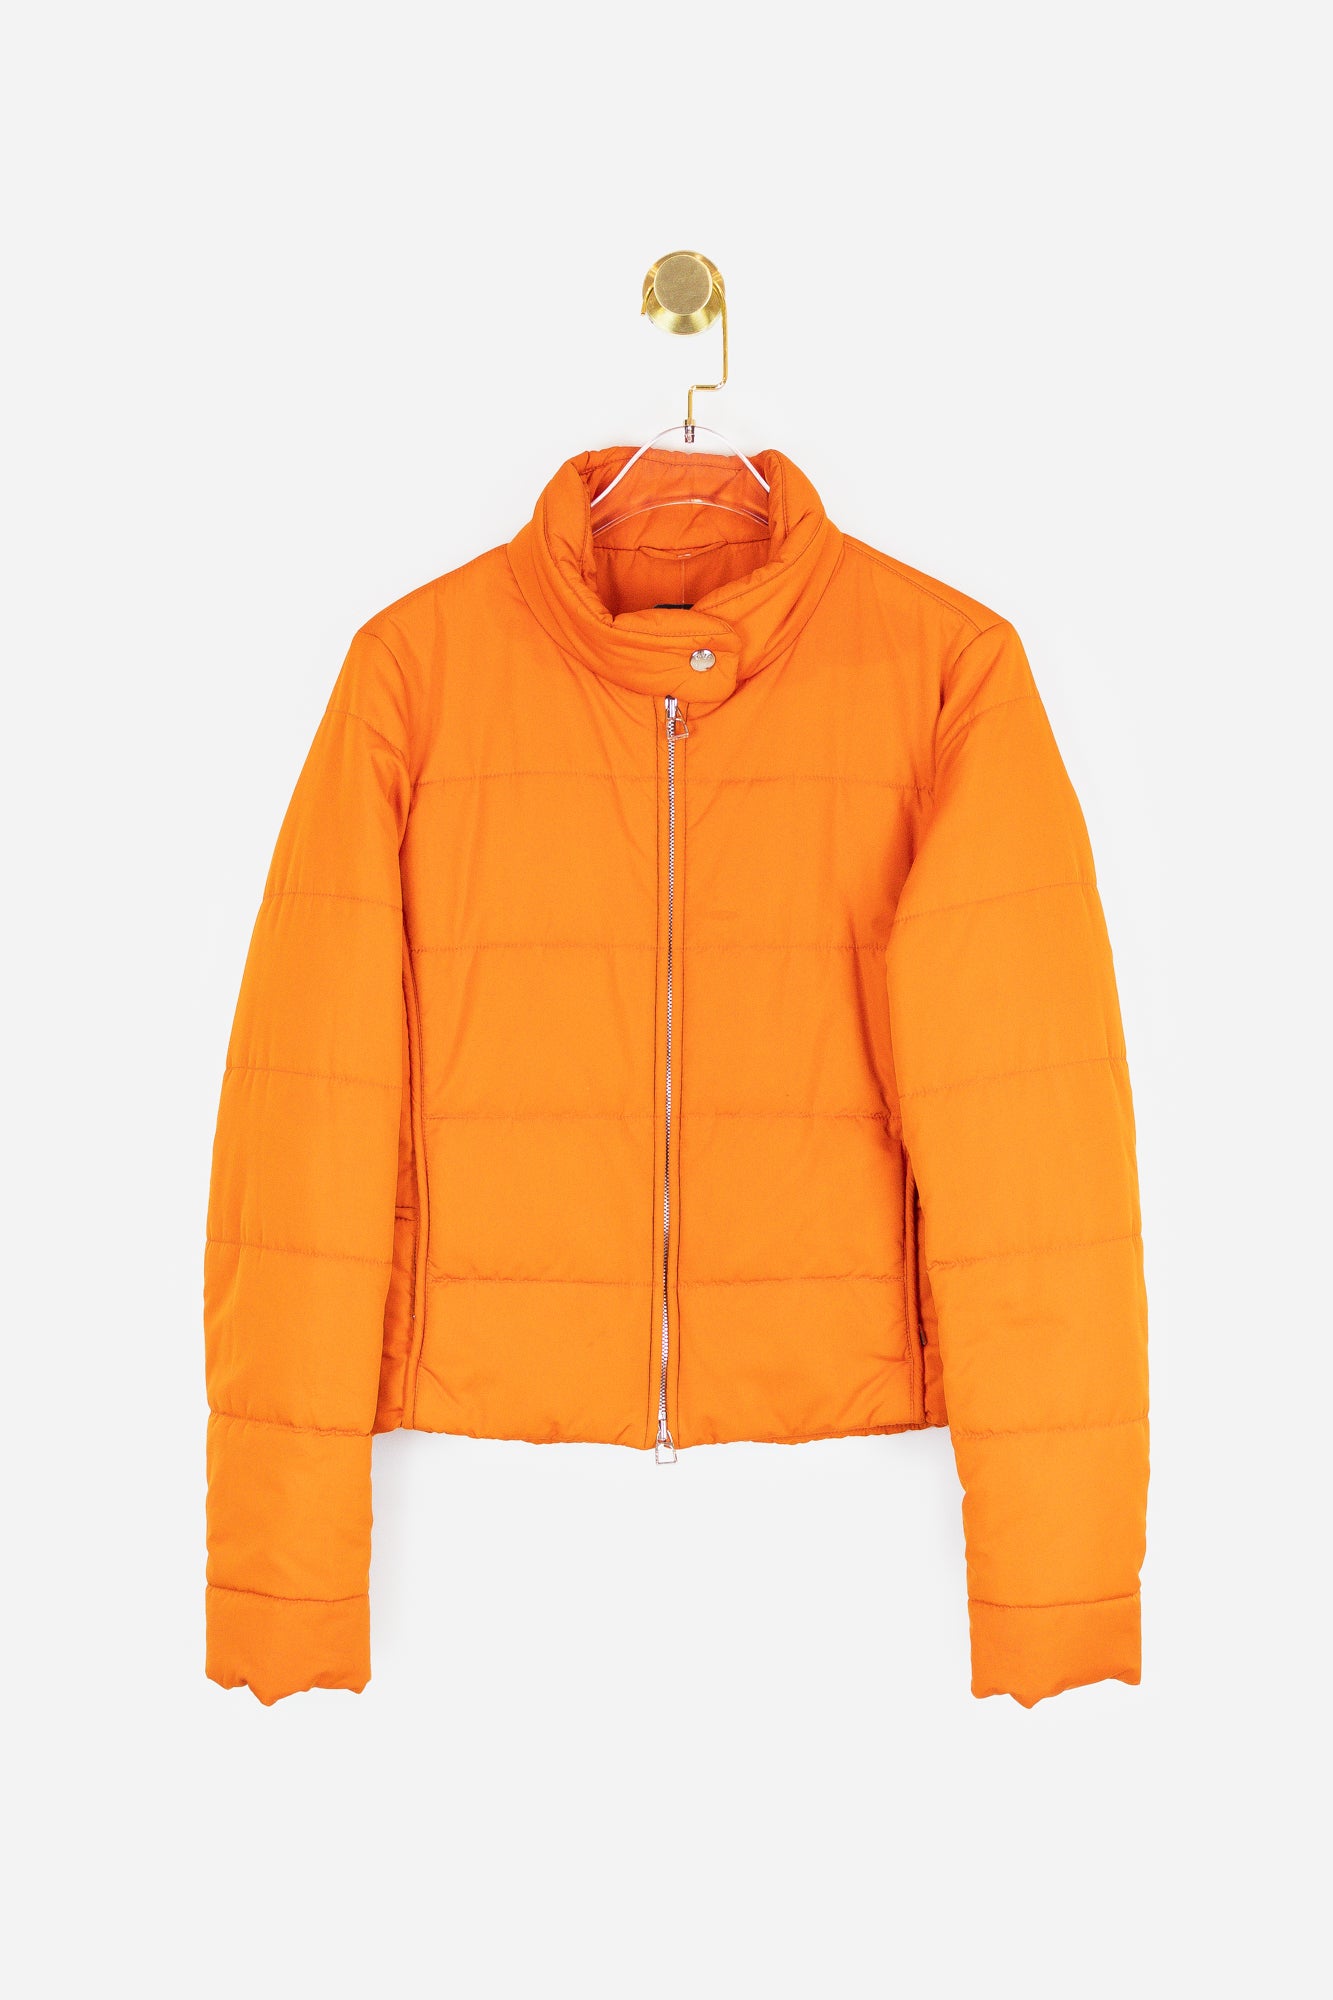 Orange Puffer Jacket - So Over It Luxury Consignment